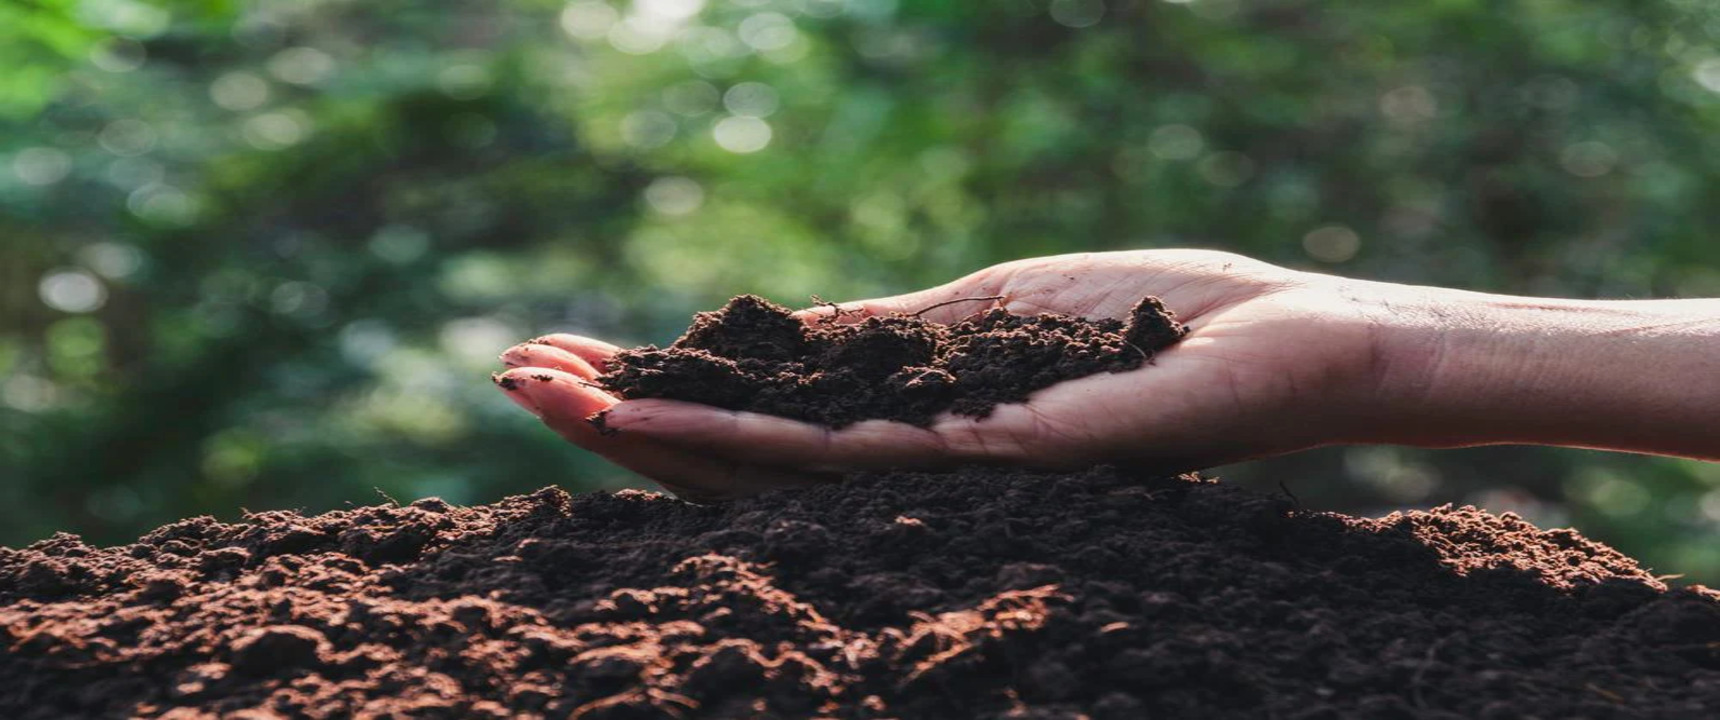 The 5 Composting Food Waste Benefits Environmental, Financial, Gardening